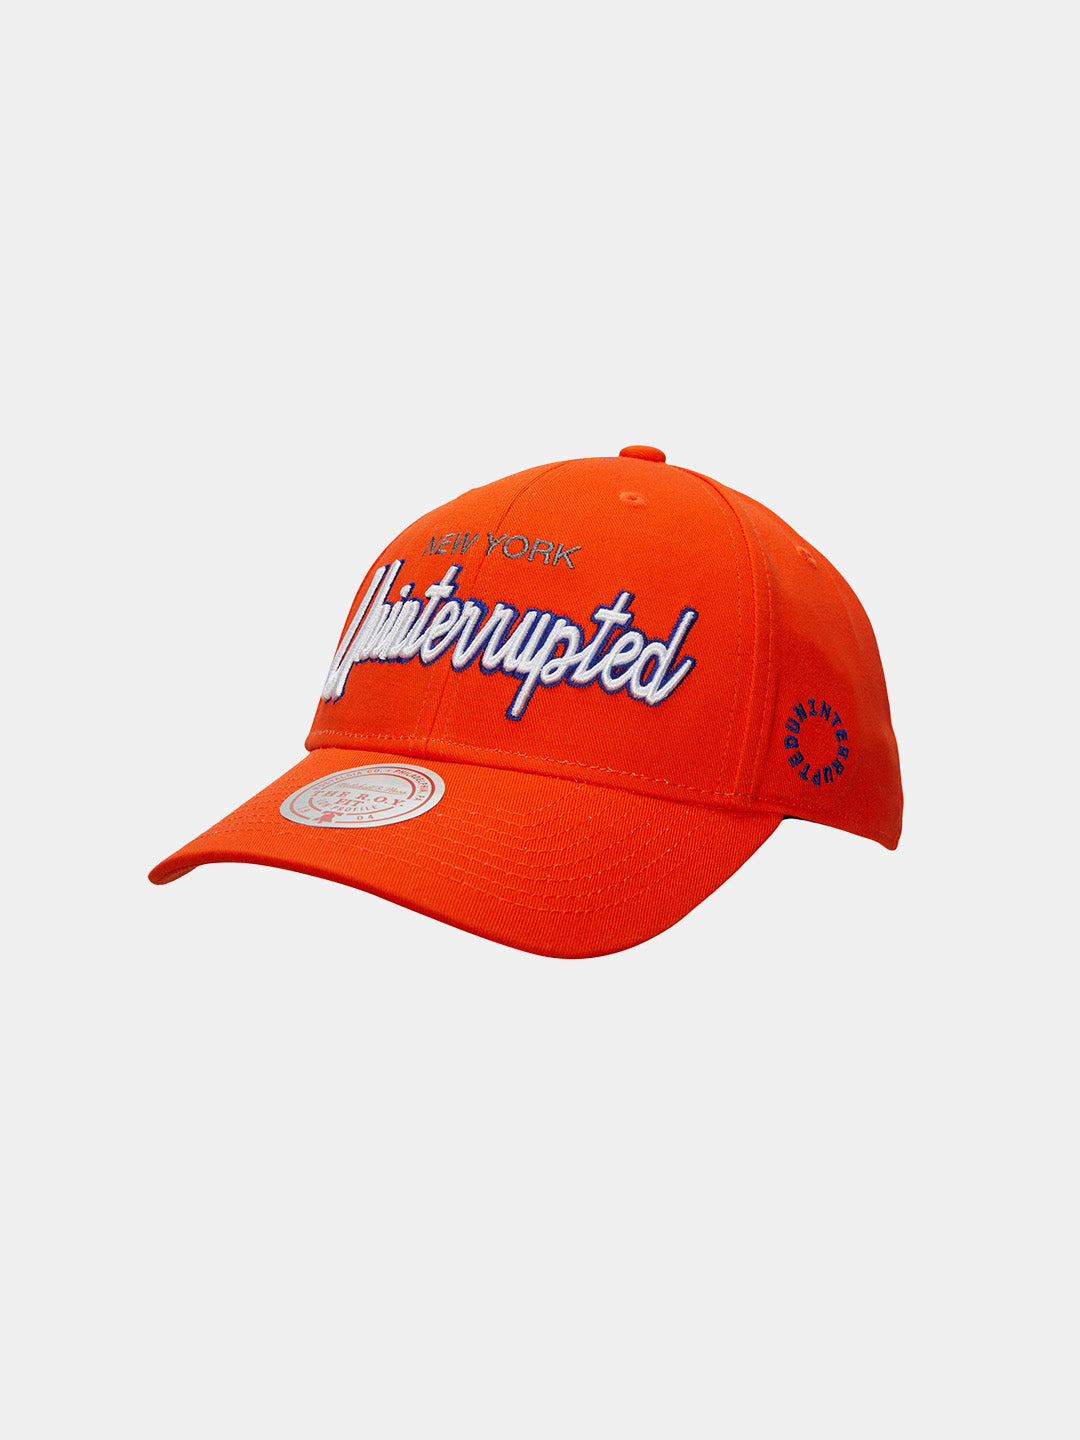 front view of the orange hat